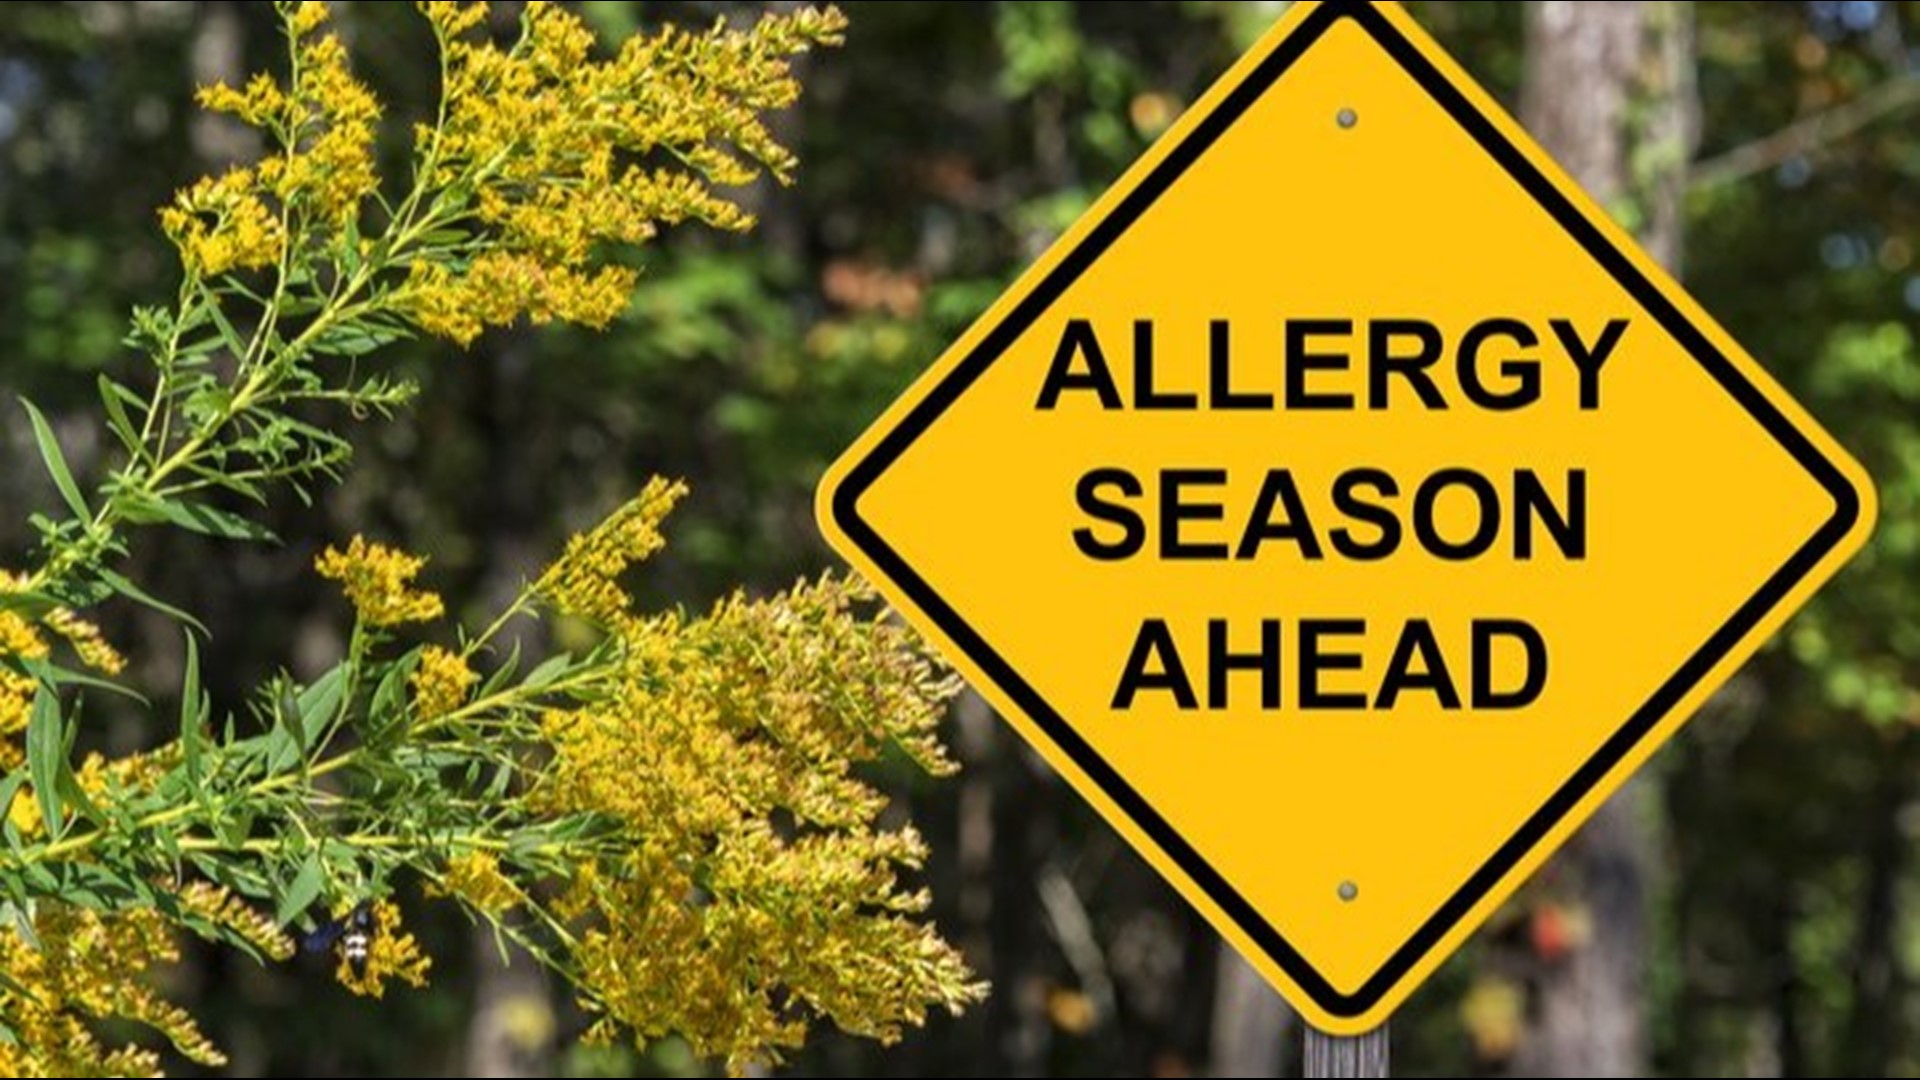 Spring means warming weather and longer days, however, it can also cause those of us with seasonal allergies to reach for the tissue box.